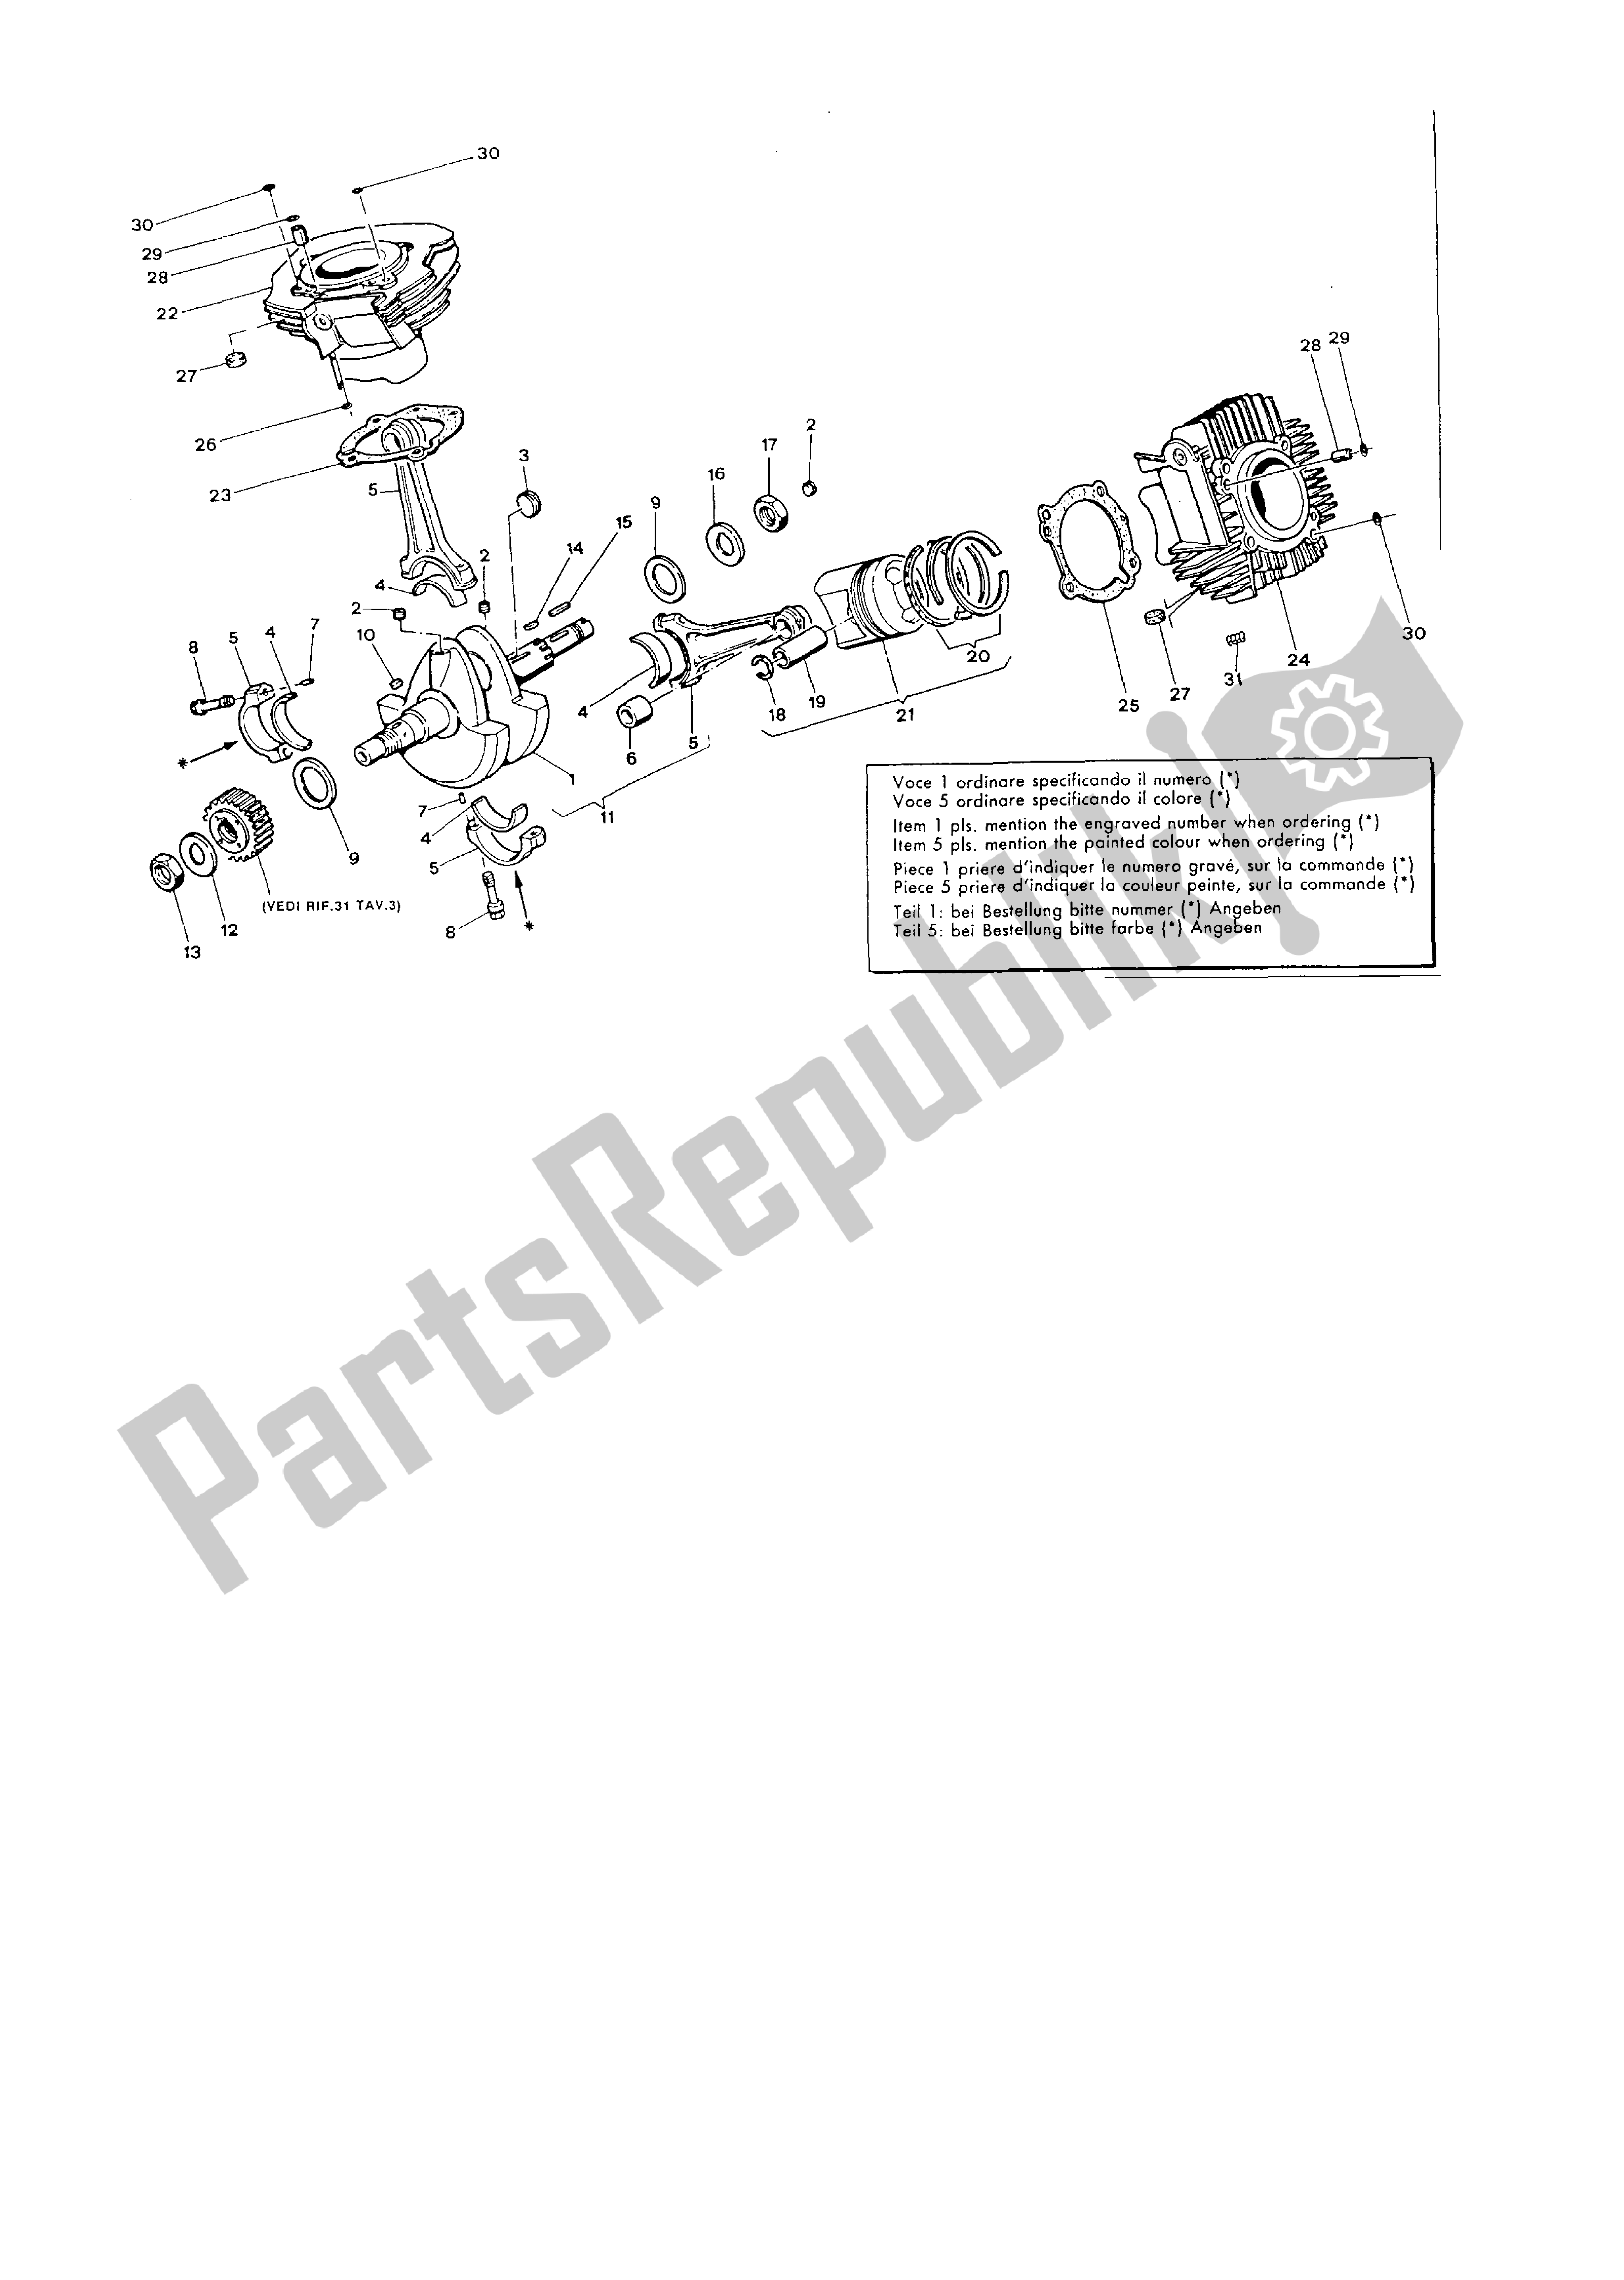 All parts for the Cylinders - Crankshaft of the Ducati Paso 750 1986 - 1988